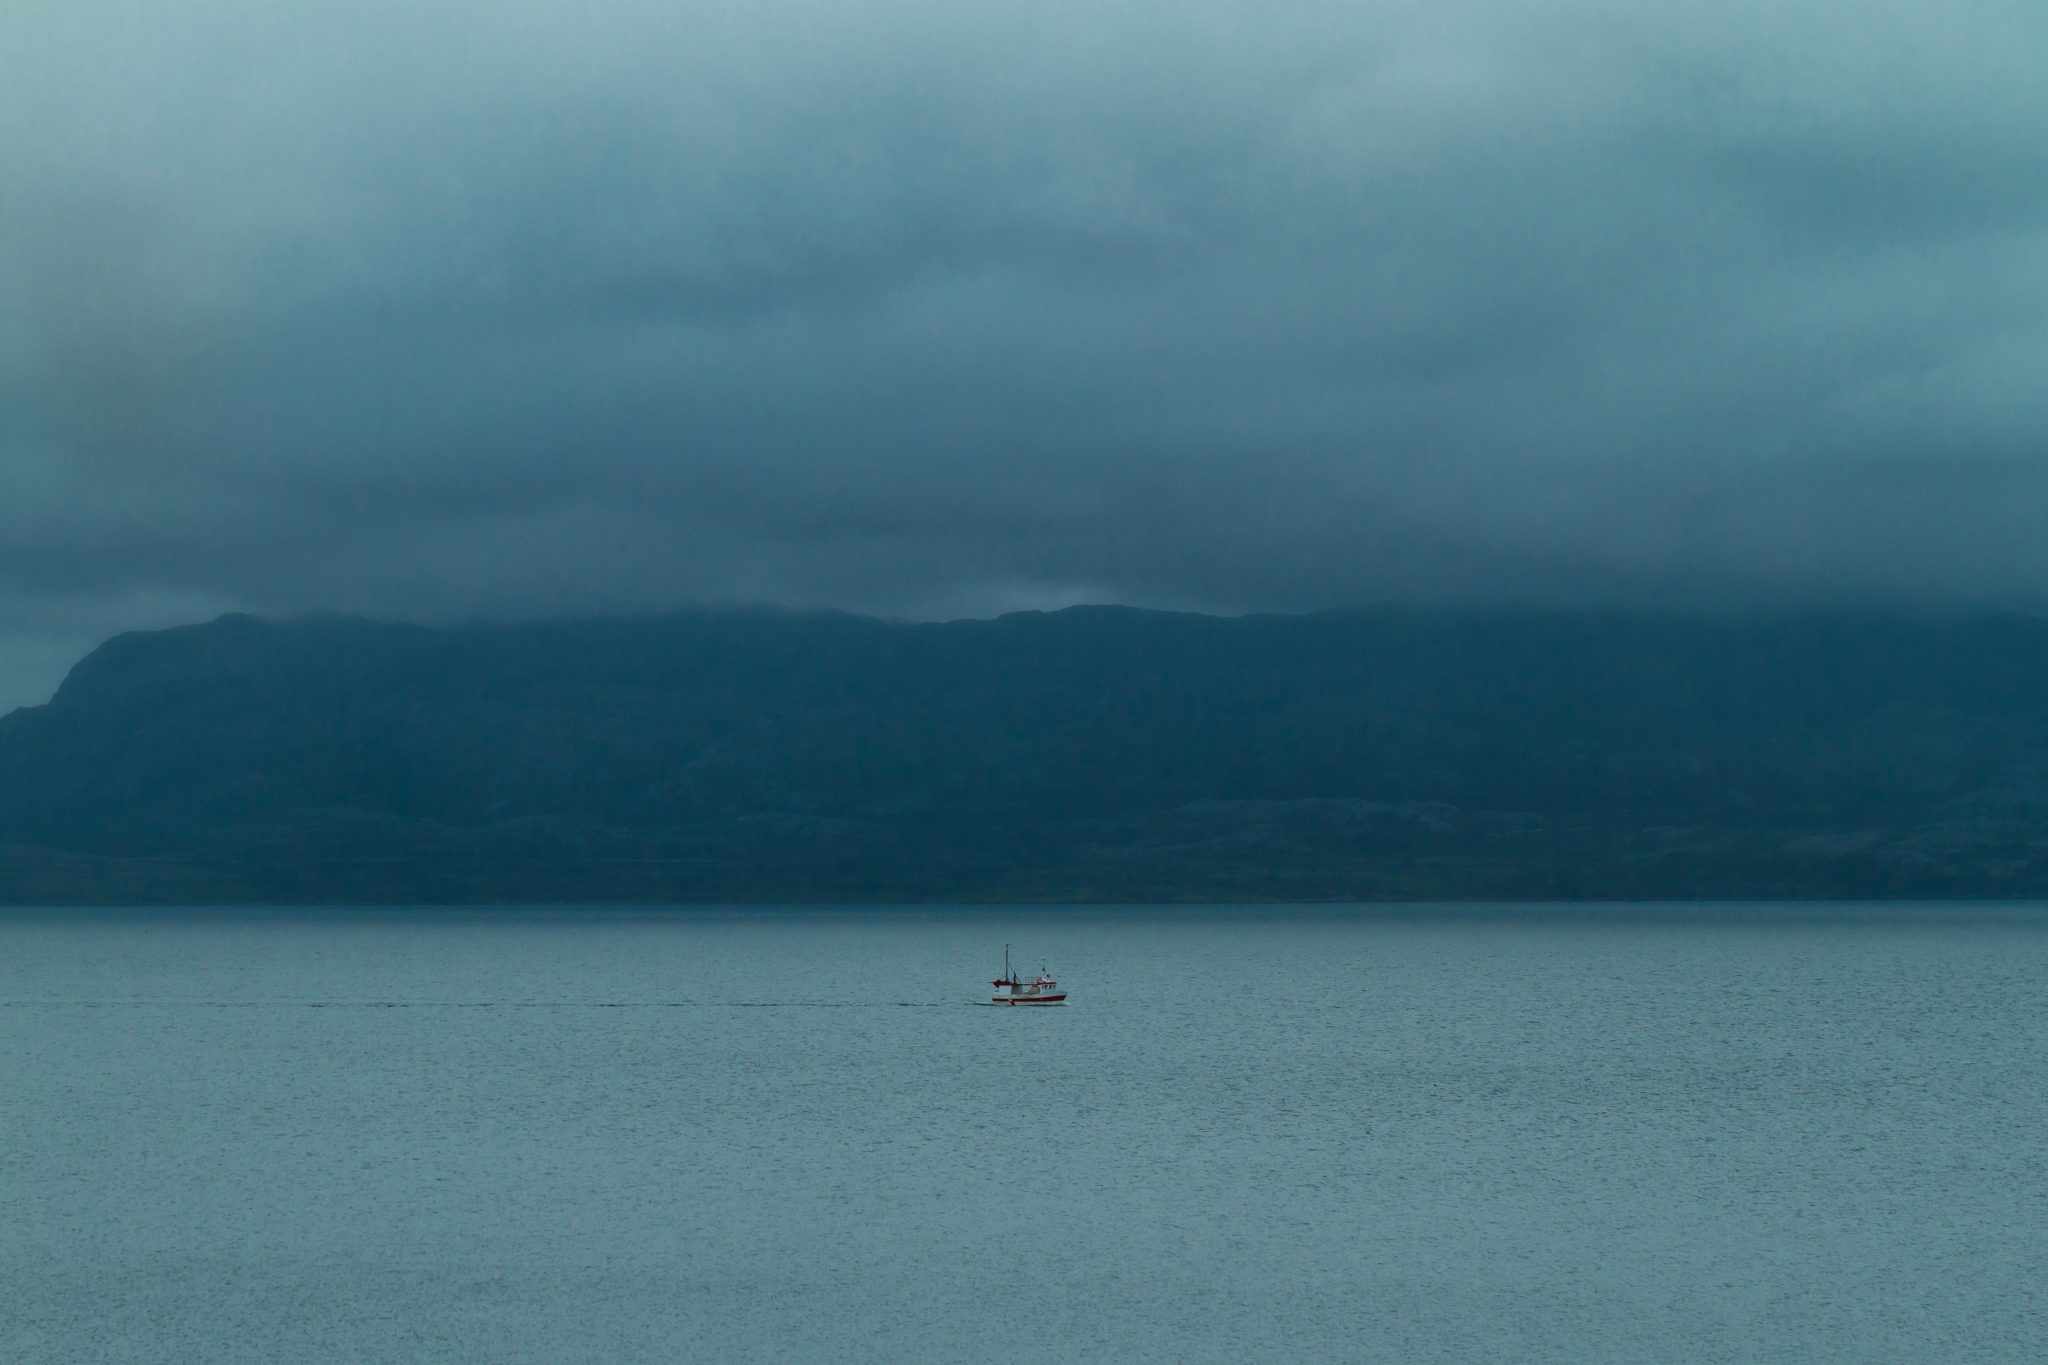 Isolation and loneliness boat in body of water